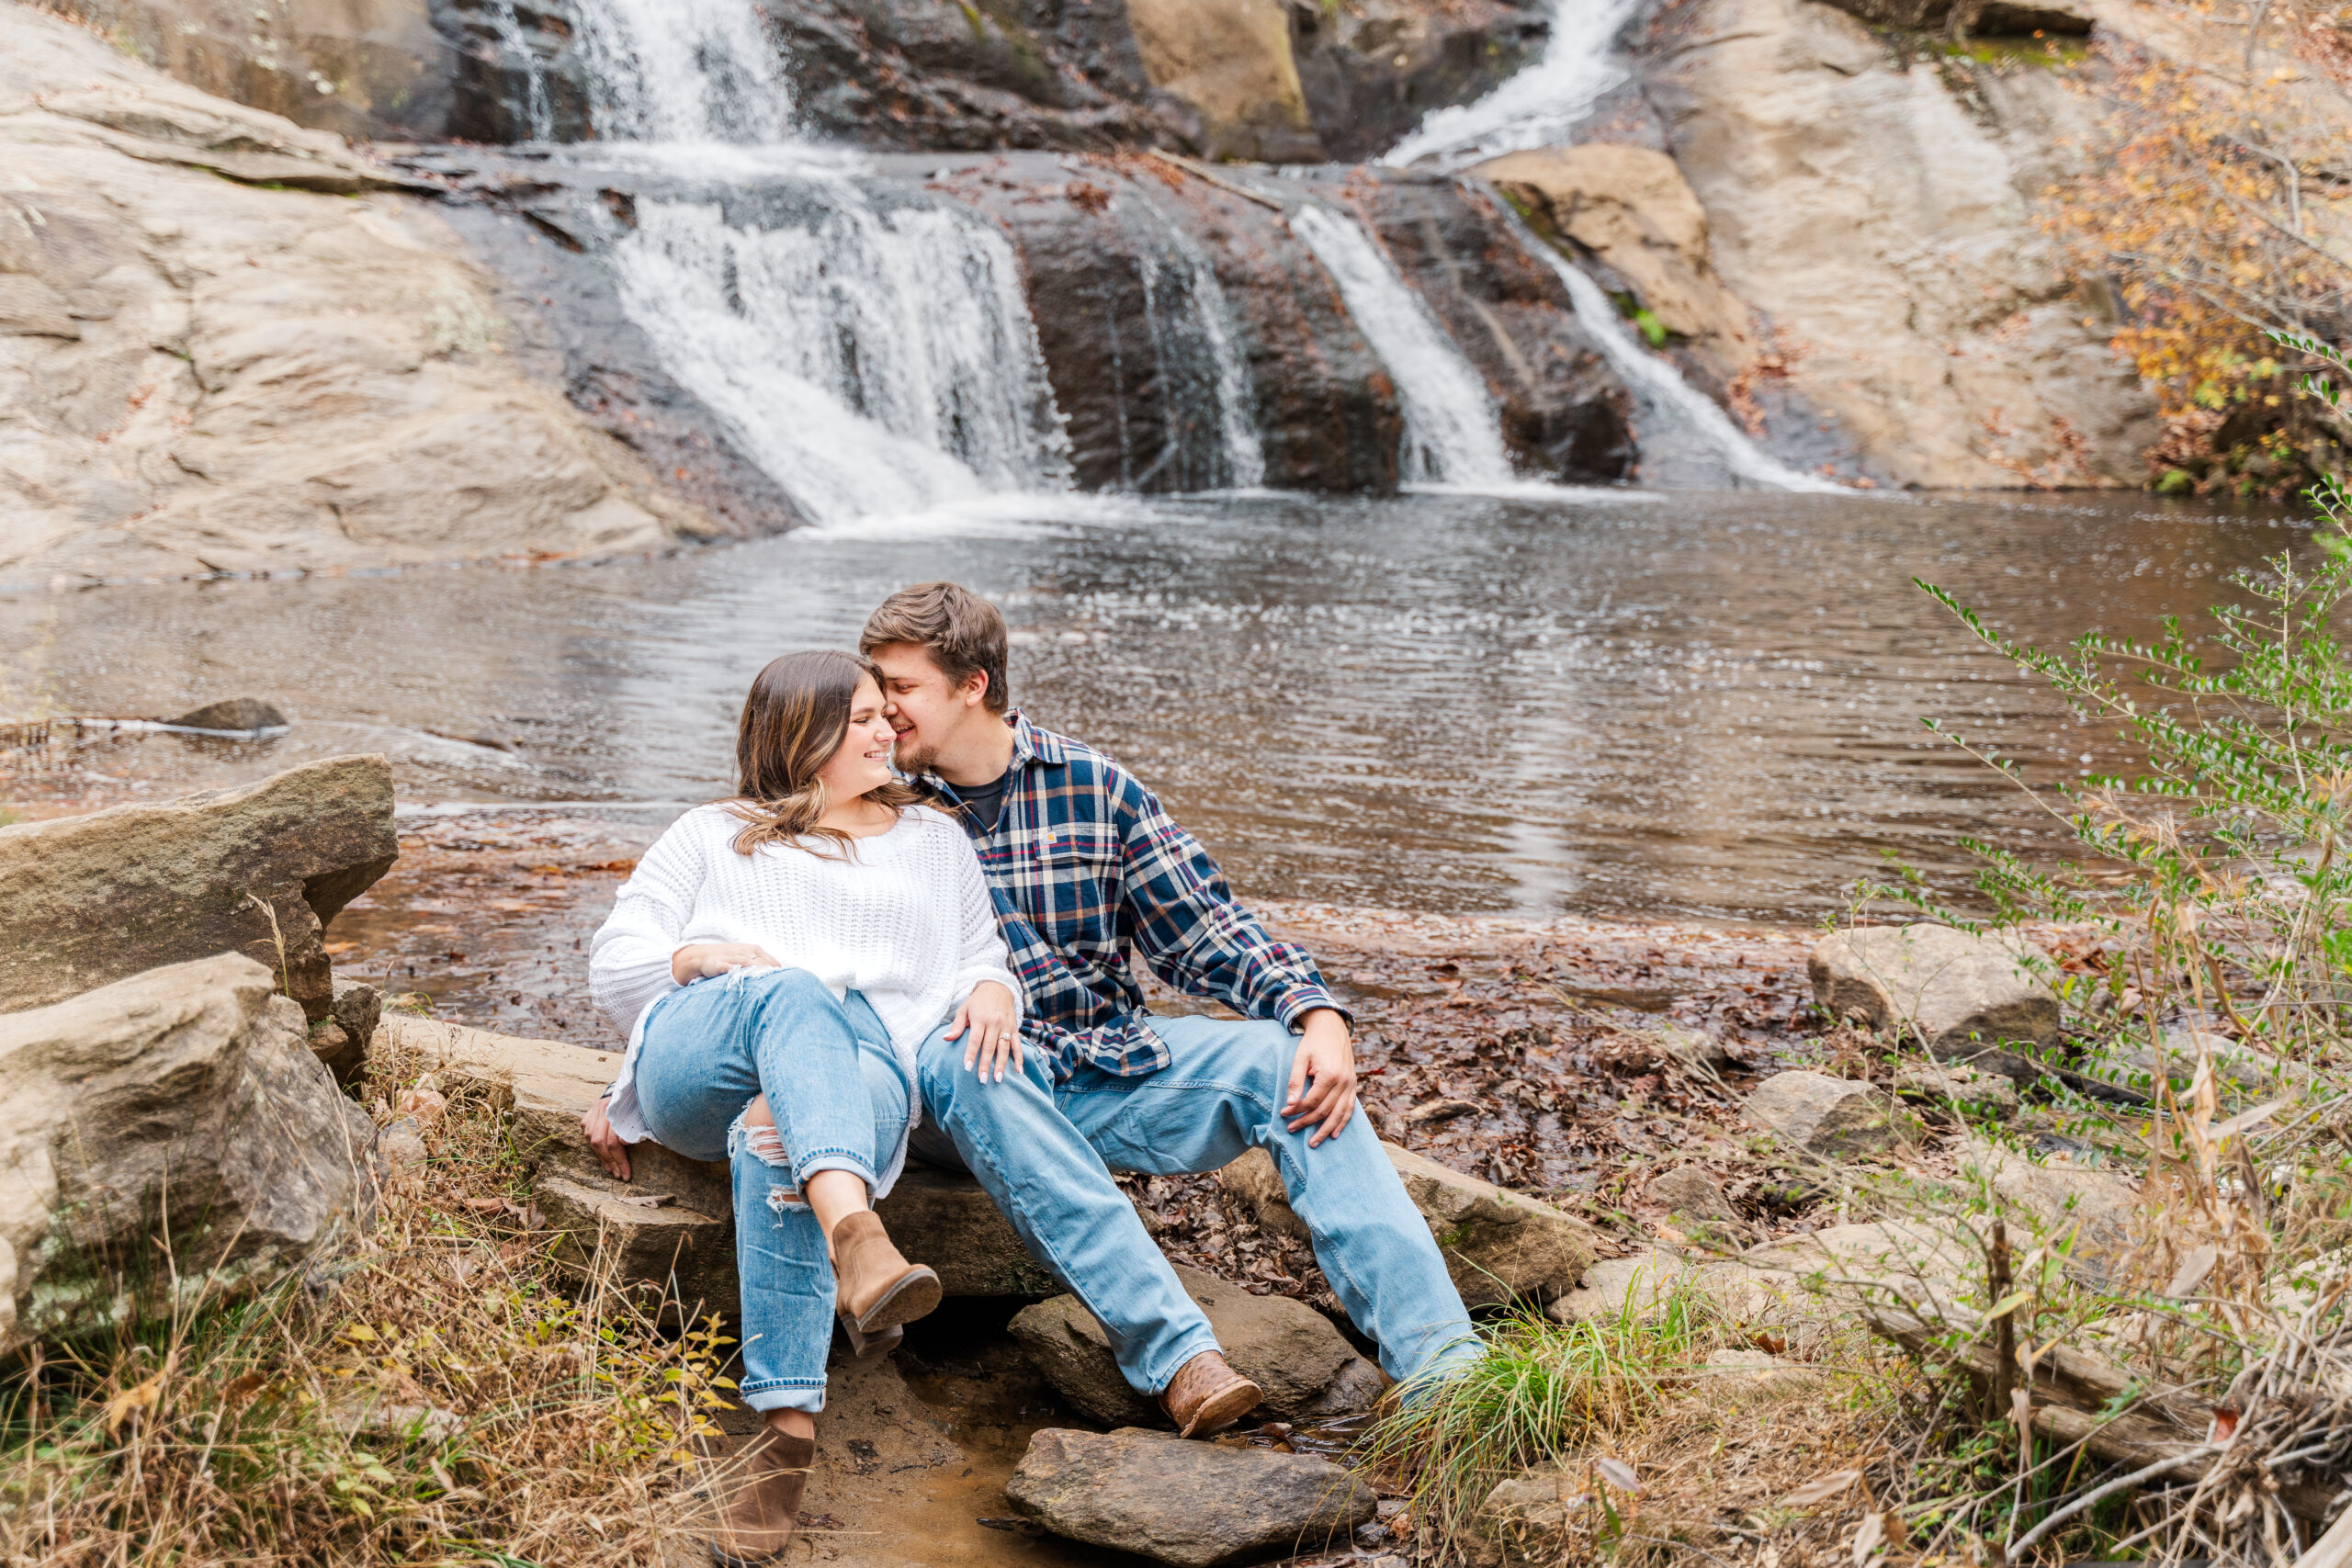 Newly engaged couple Cheyenne and Ben snuggle up close together on a rock on the bank of small pool. A beautiful two-tiered waterfall flows in the background behind them.